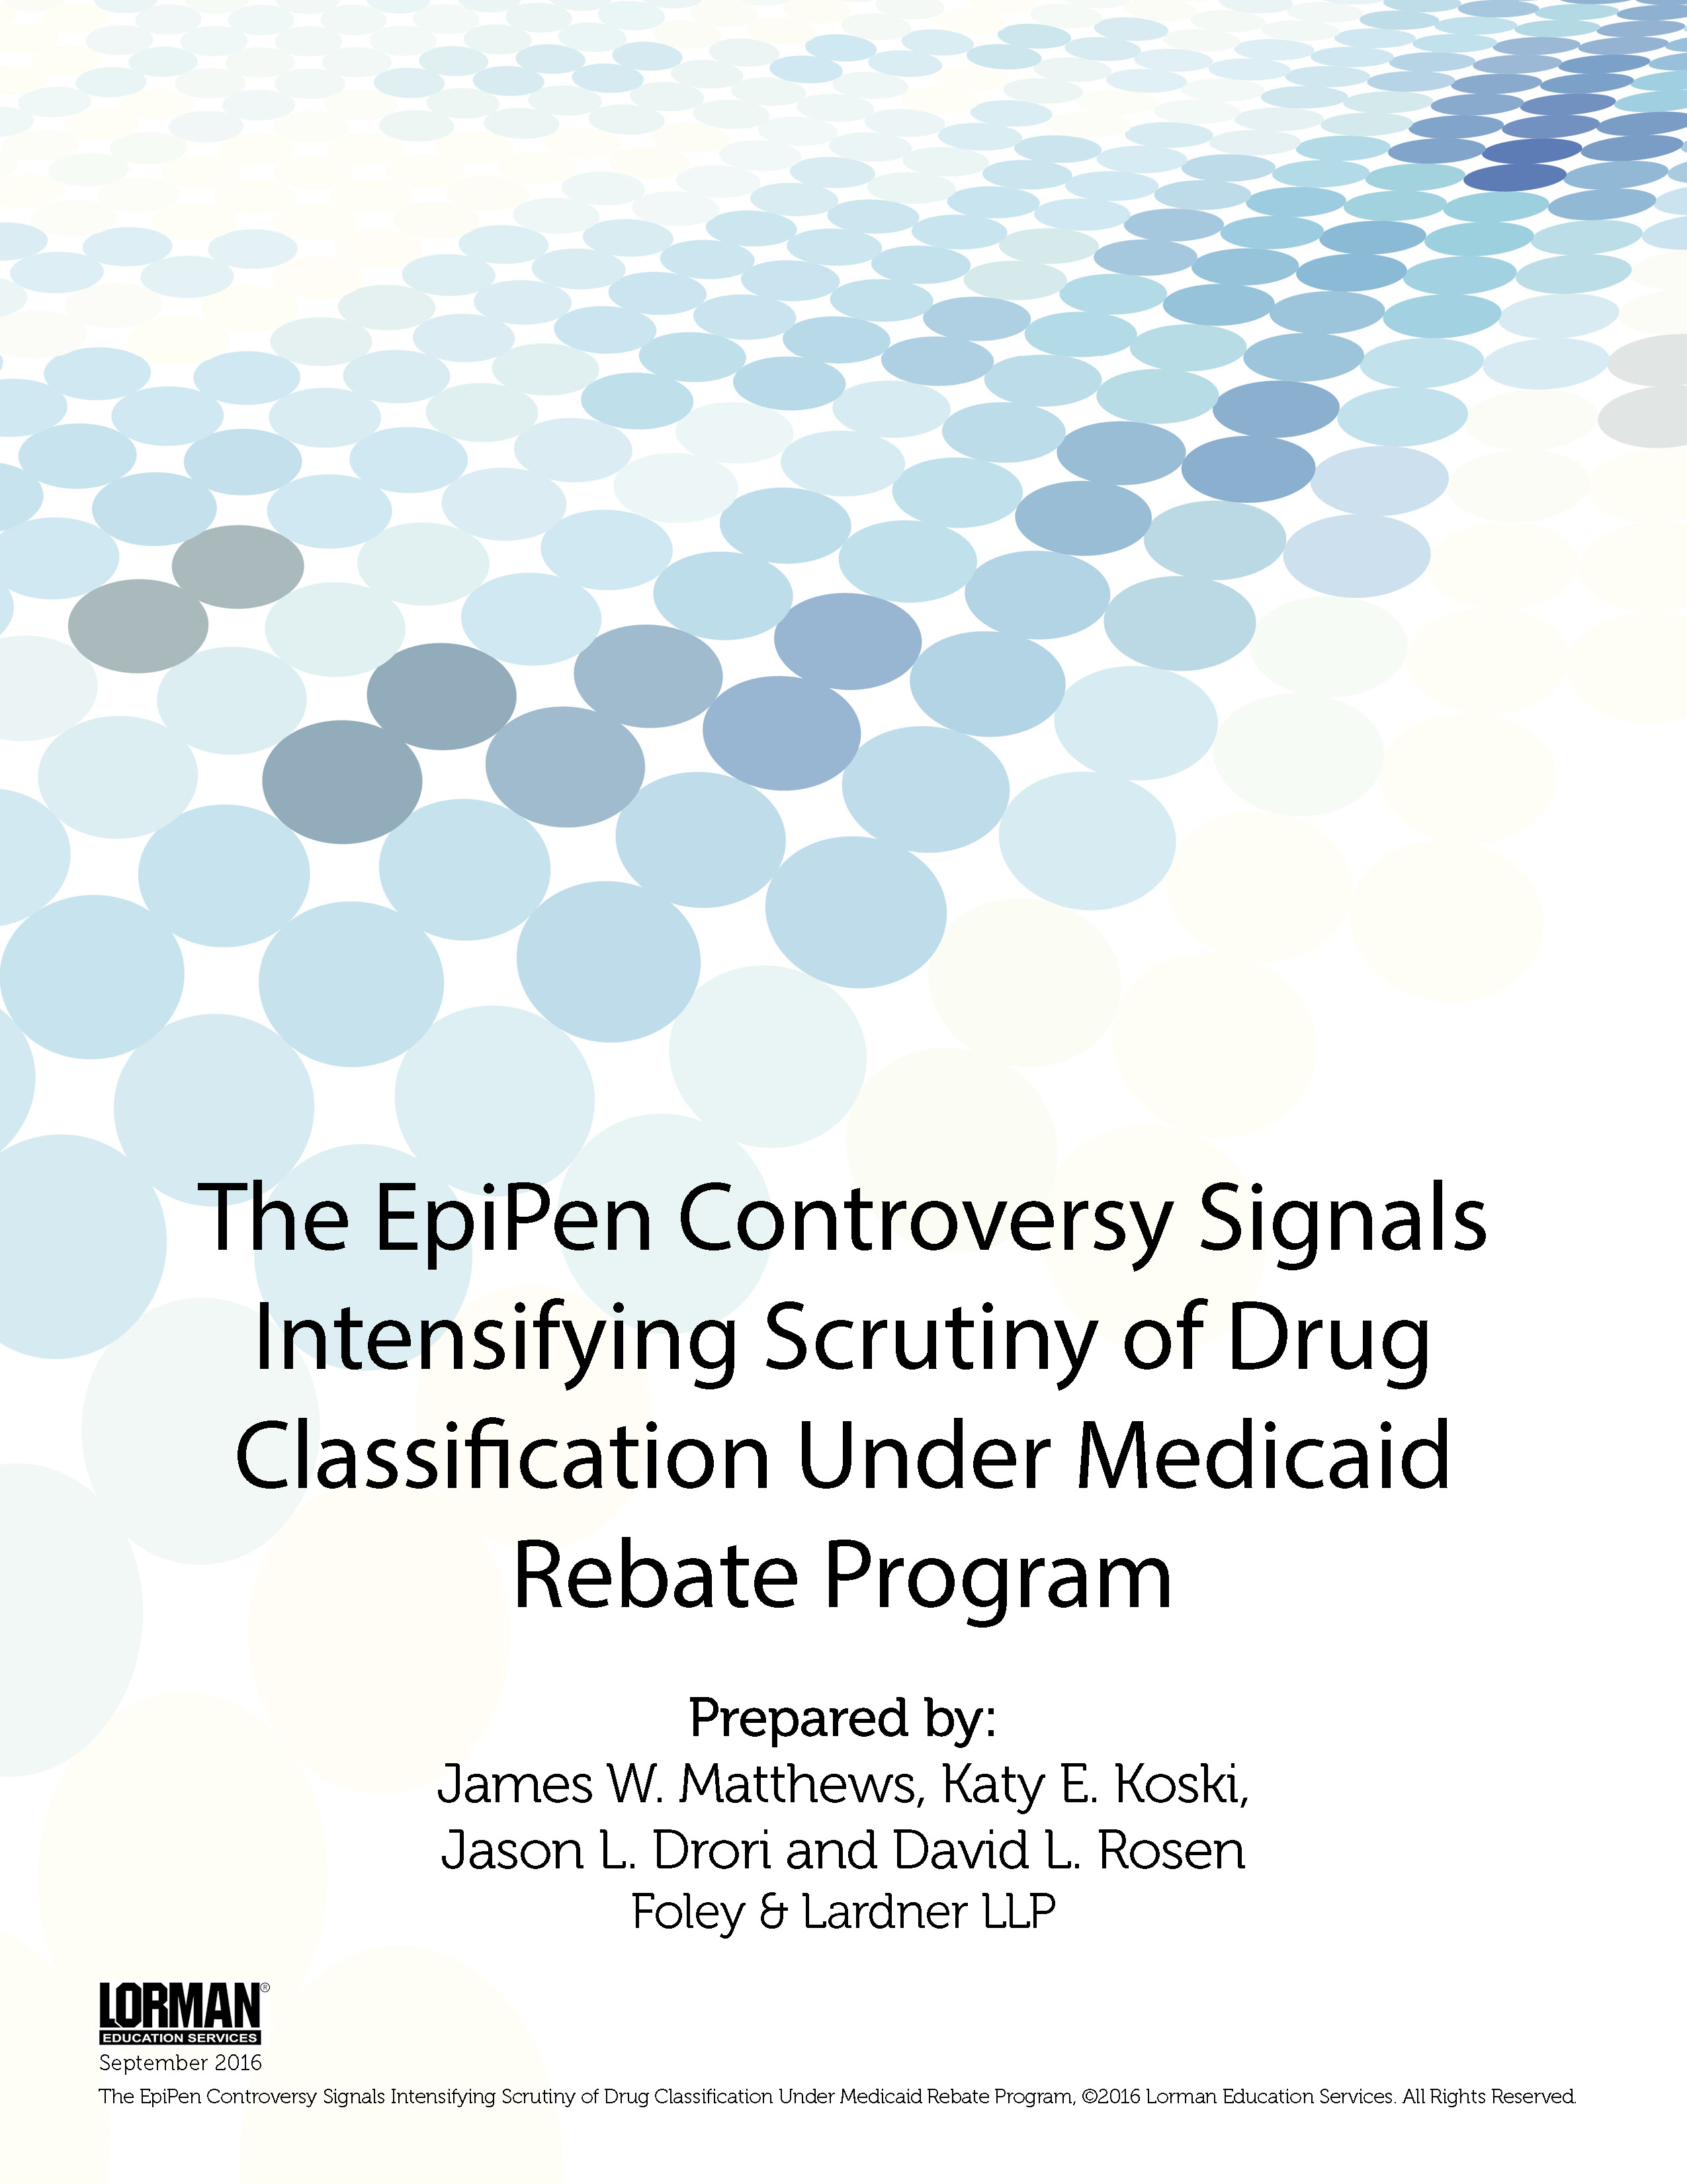 epipen-controversy-signals-intensifying-drug-classification-scrutiny